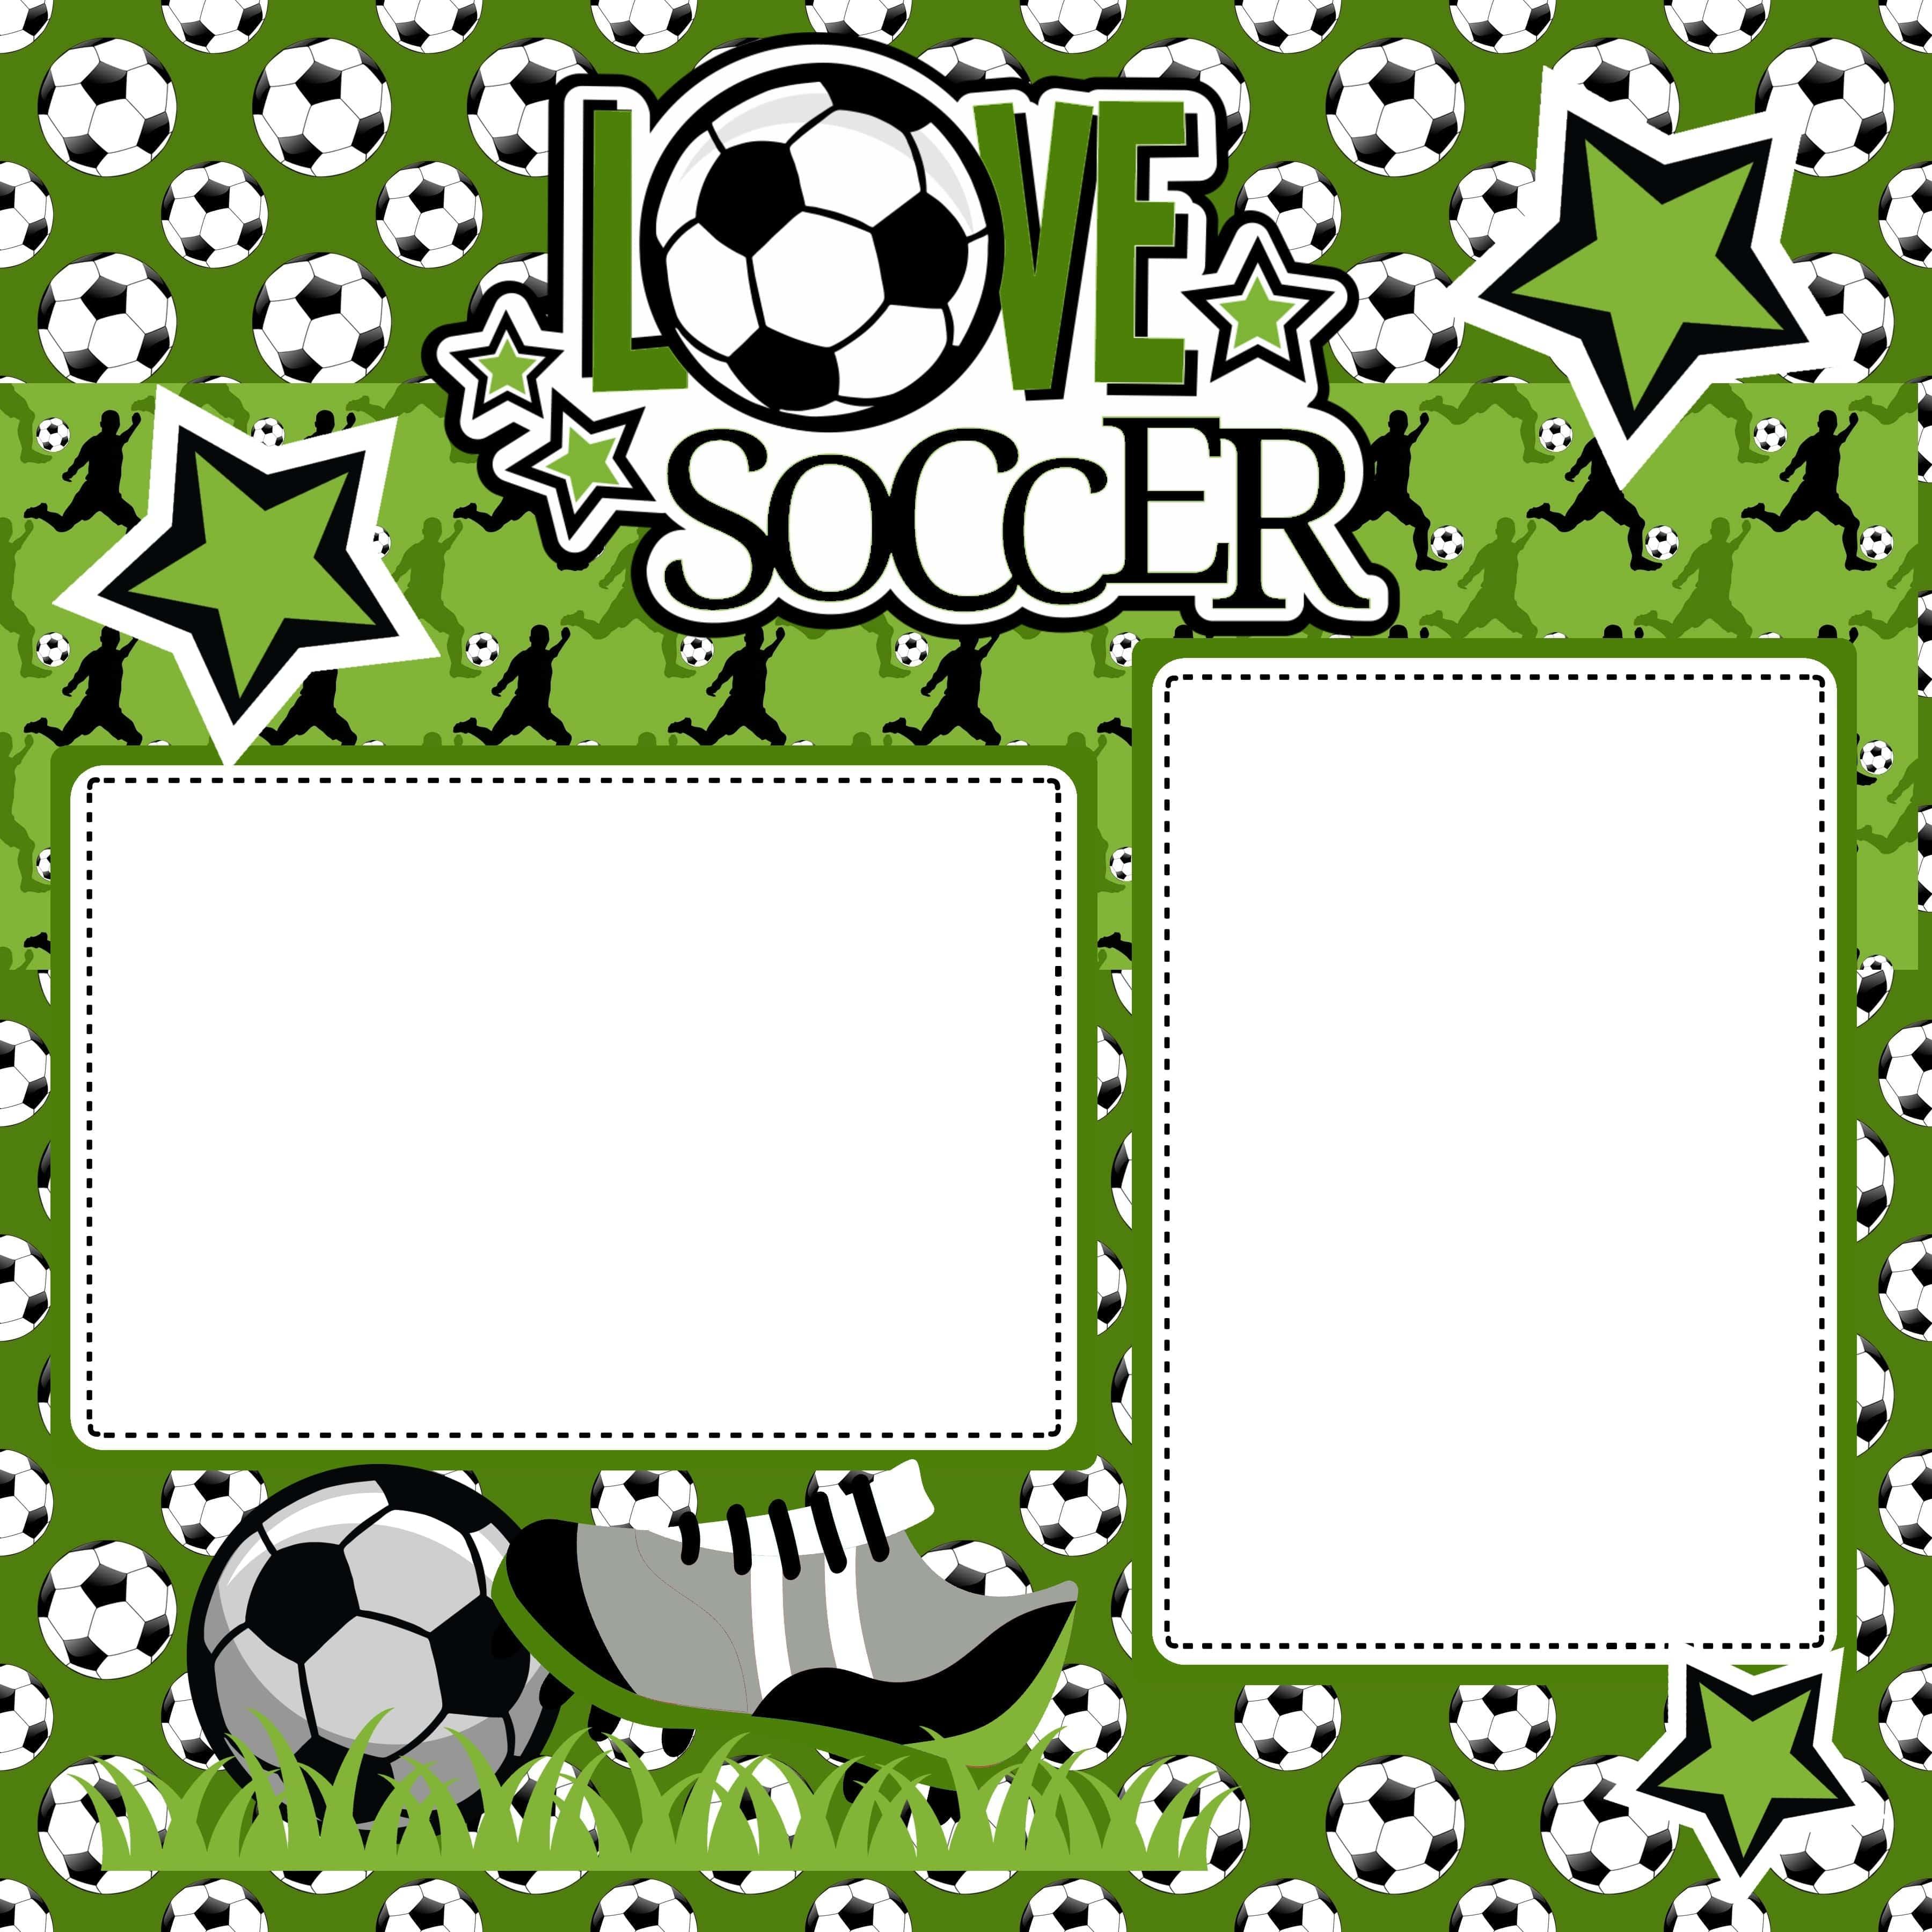 Love Soccer (2) - 12 x 12 Premade, Printed Scrapbook Pages by SSC Designs - Scrapbook Supply Companies